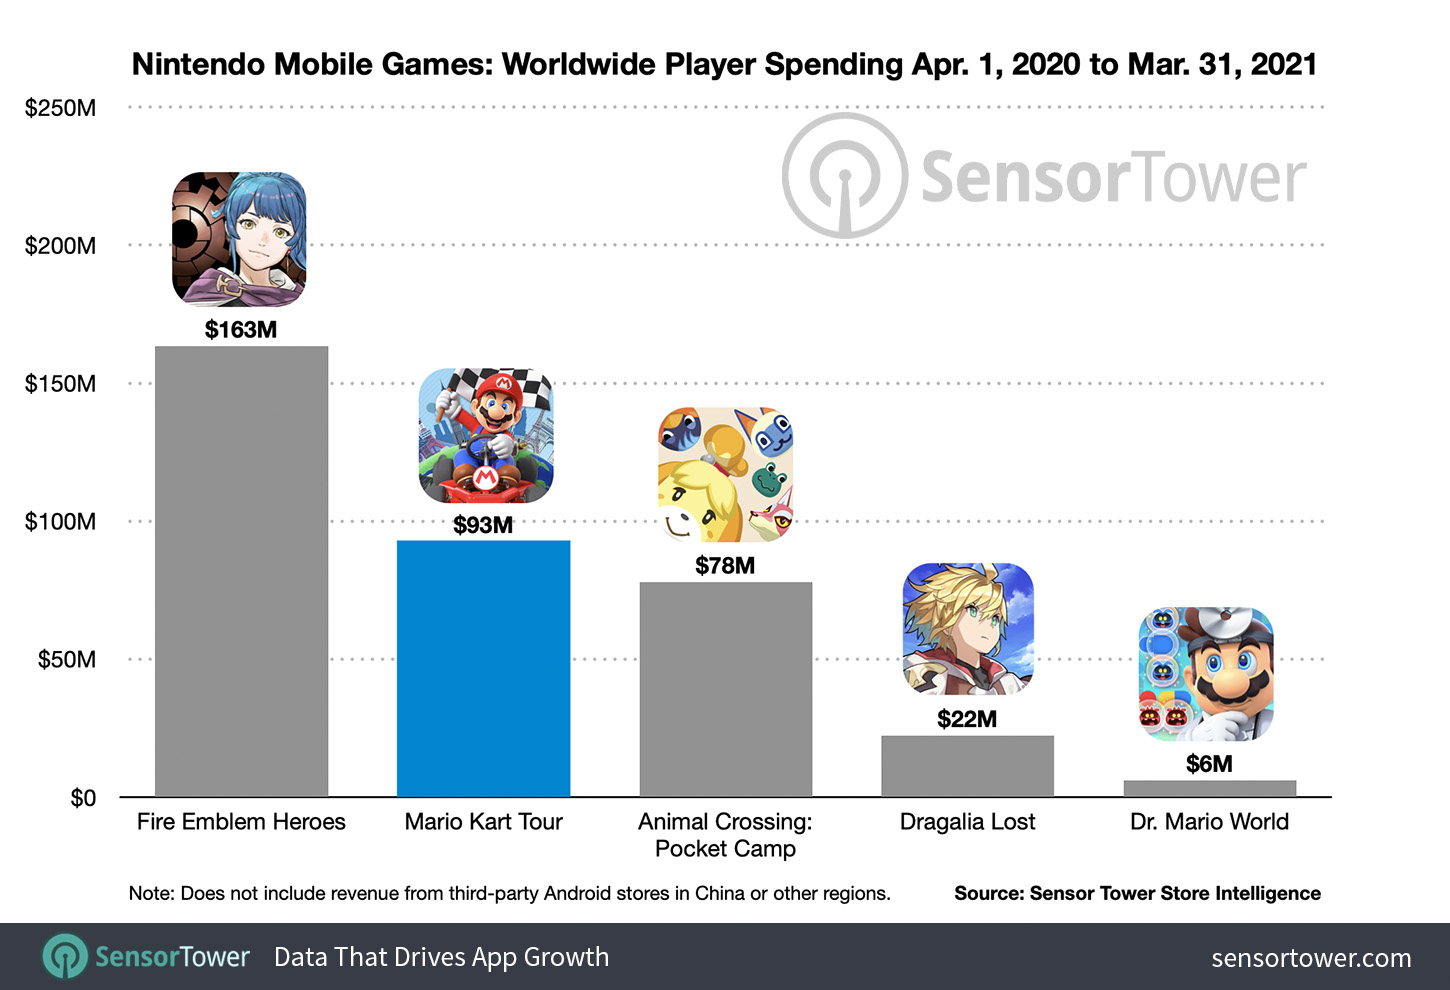 Top Nintendo Mobile Games by Worldwide Player Spending From April 1, 2020 to March 31, 2021